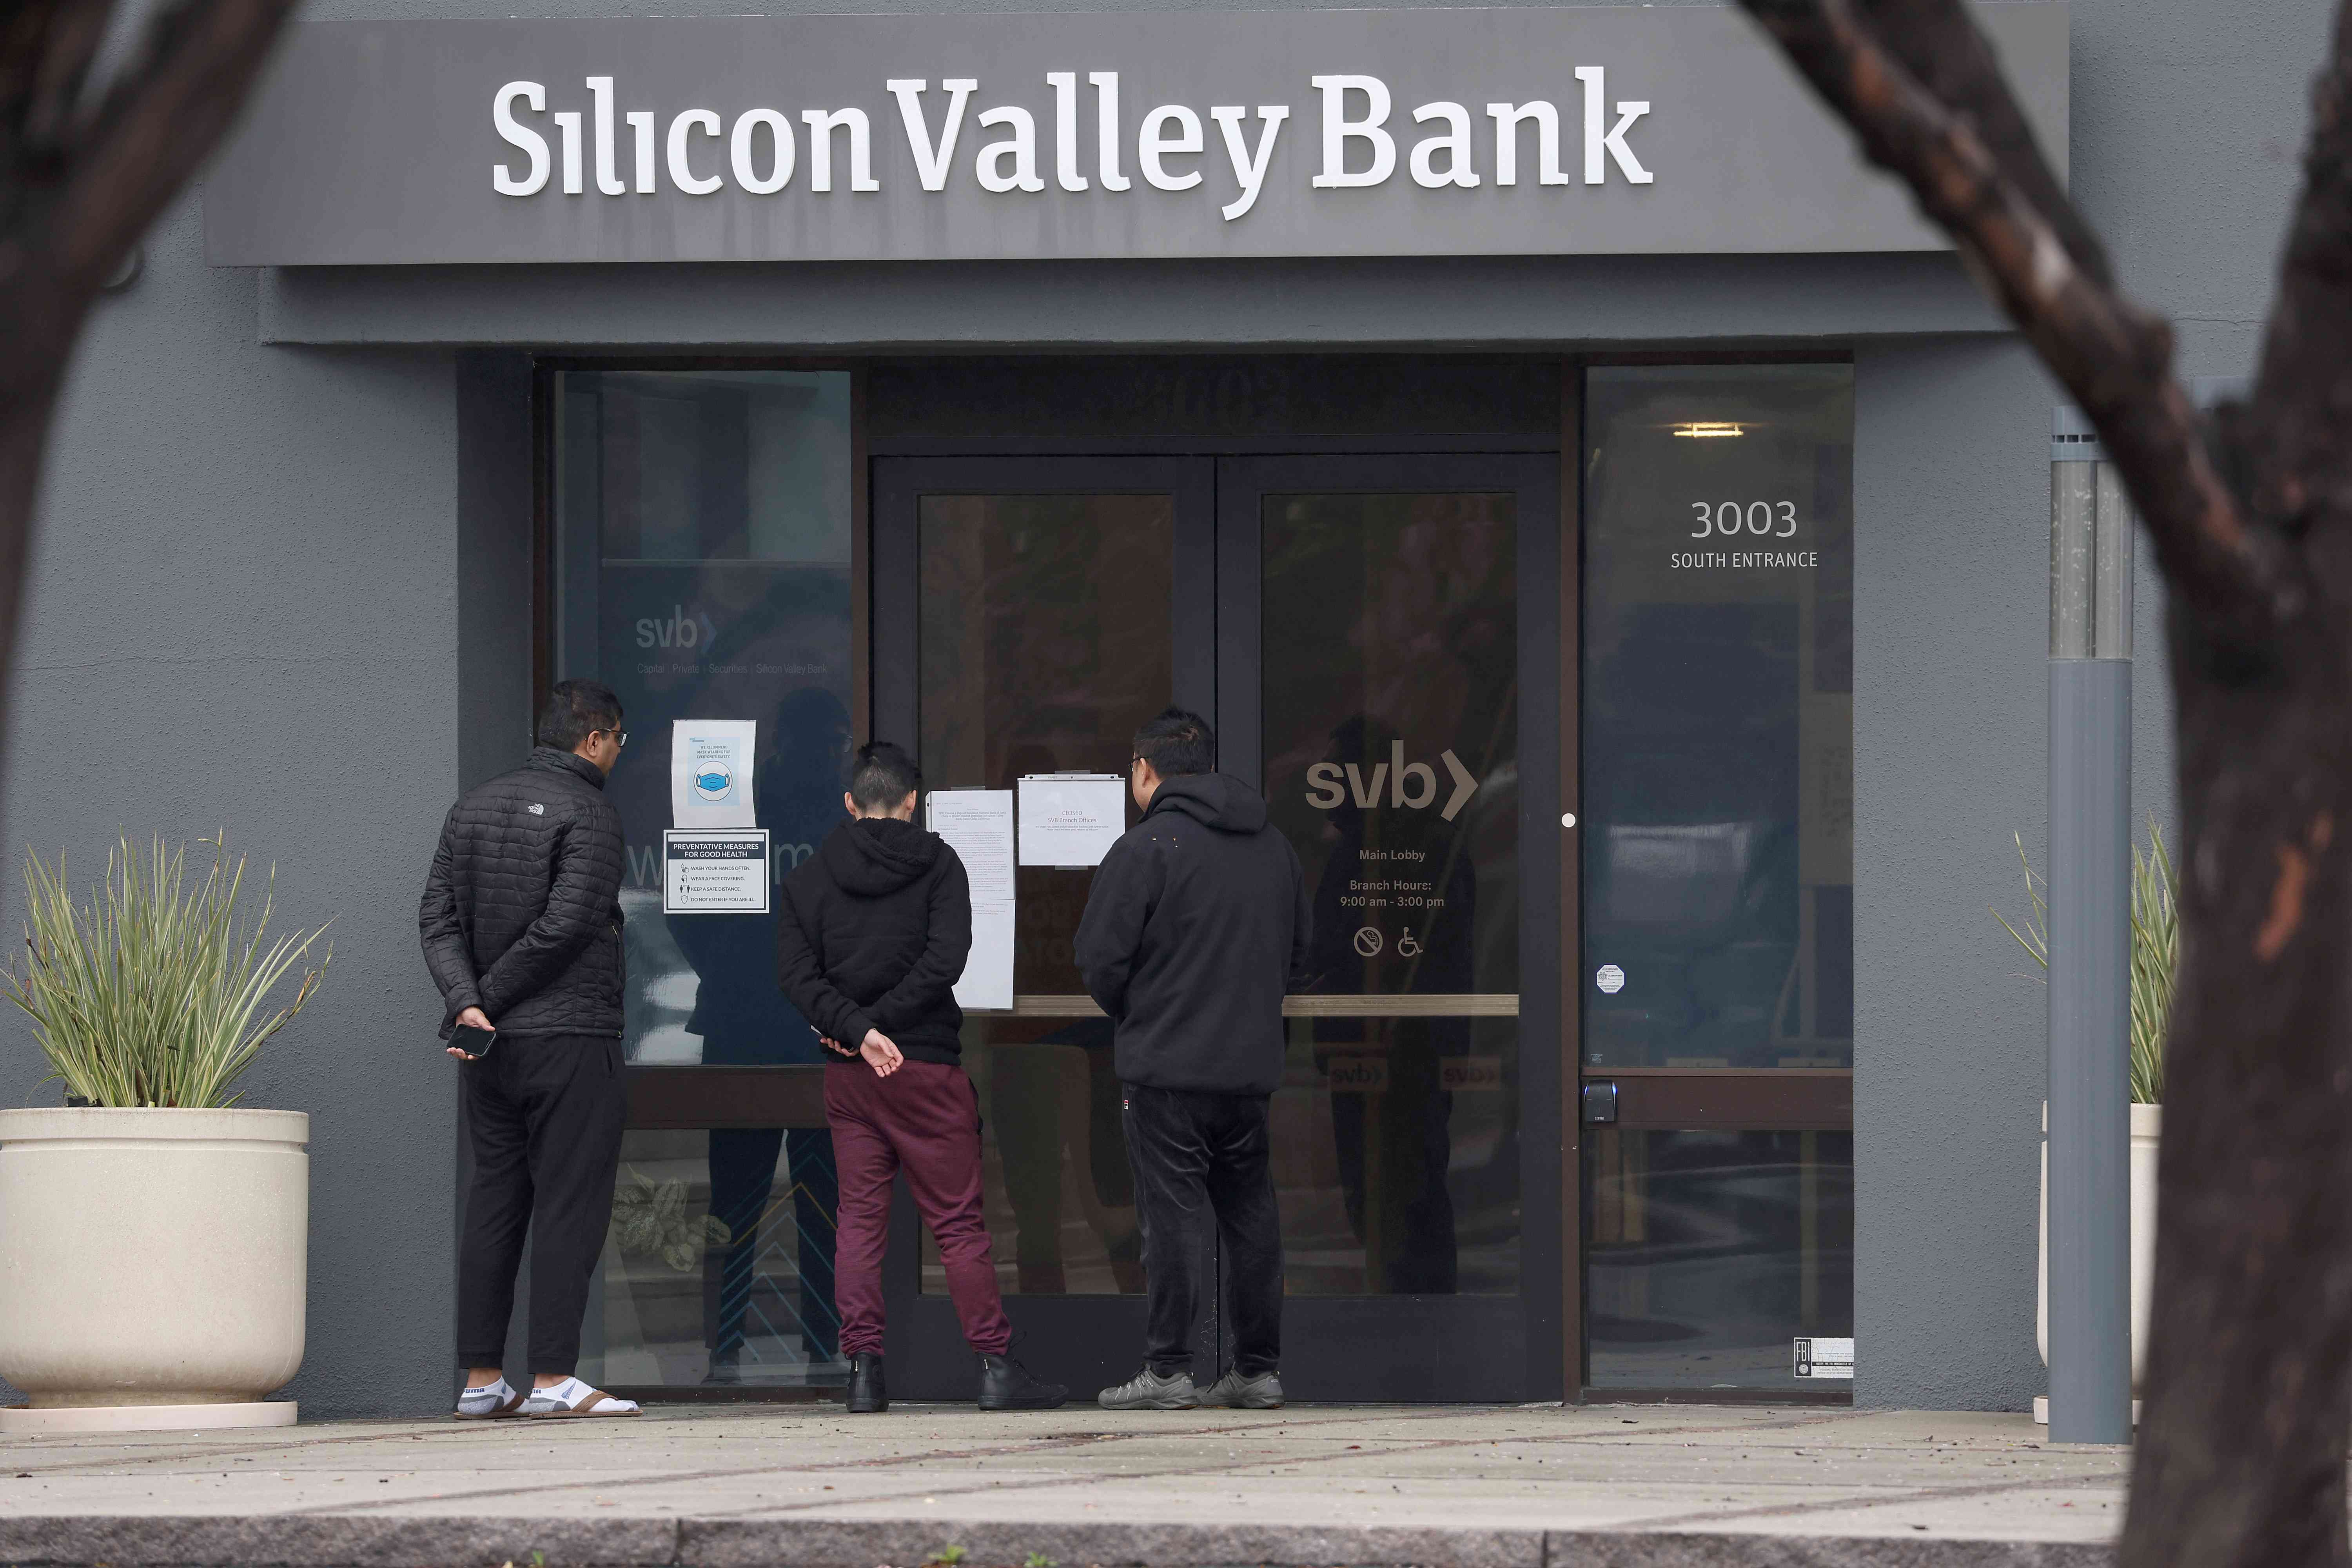 SANTA CLARA, CALIFORNIA - MARCH 10: Employees stand outside of the shuttered Silicon Valley Bank (SVB) headquarters on March 10, 2023 in Santa Clara, California. Silicon Valley Bank was shut down on Friday morning by California regulators and was put in control of the U.S. Federal Deposit Insurance Corporation. Prior to being shut down by regulators, shares of SVB were halted Friday morning after falling more than 60% in premarket trading following a 60% declined on Thursday when the bank sold off a portfolio of US Treasuries and $1.75 billion in shares to cover declining customer deposits.